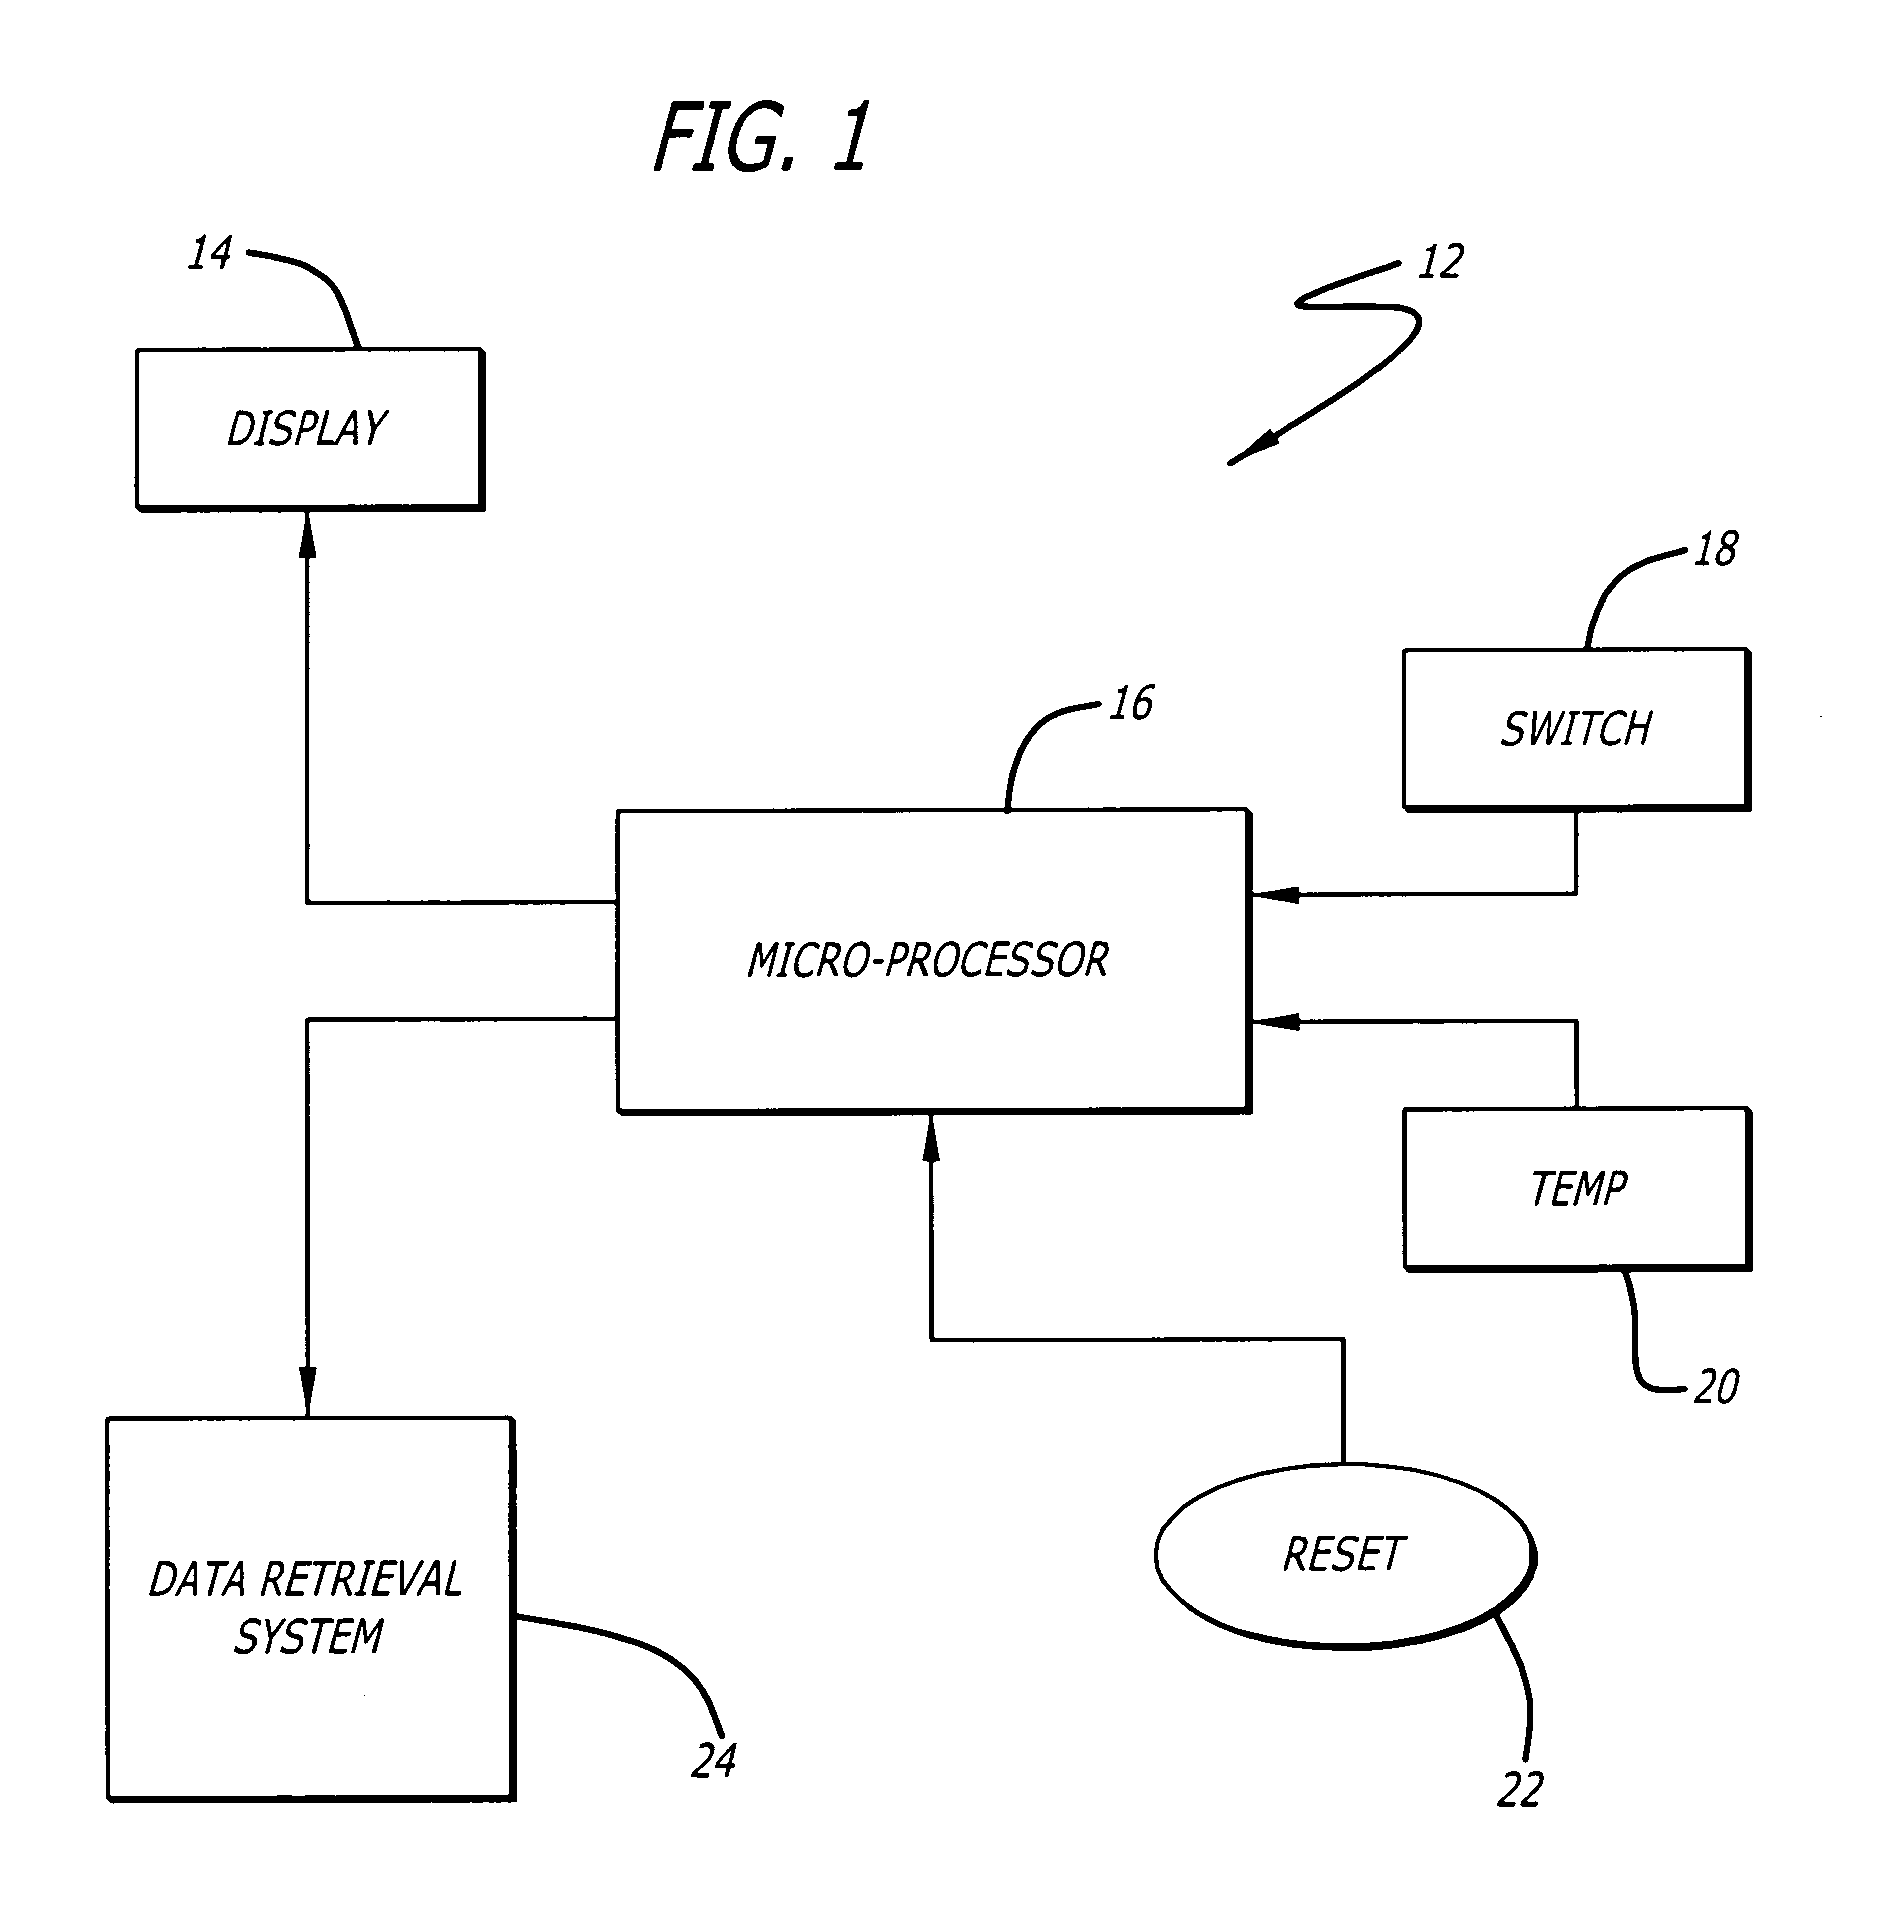 System for reducing carbon brake wear